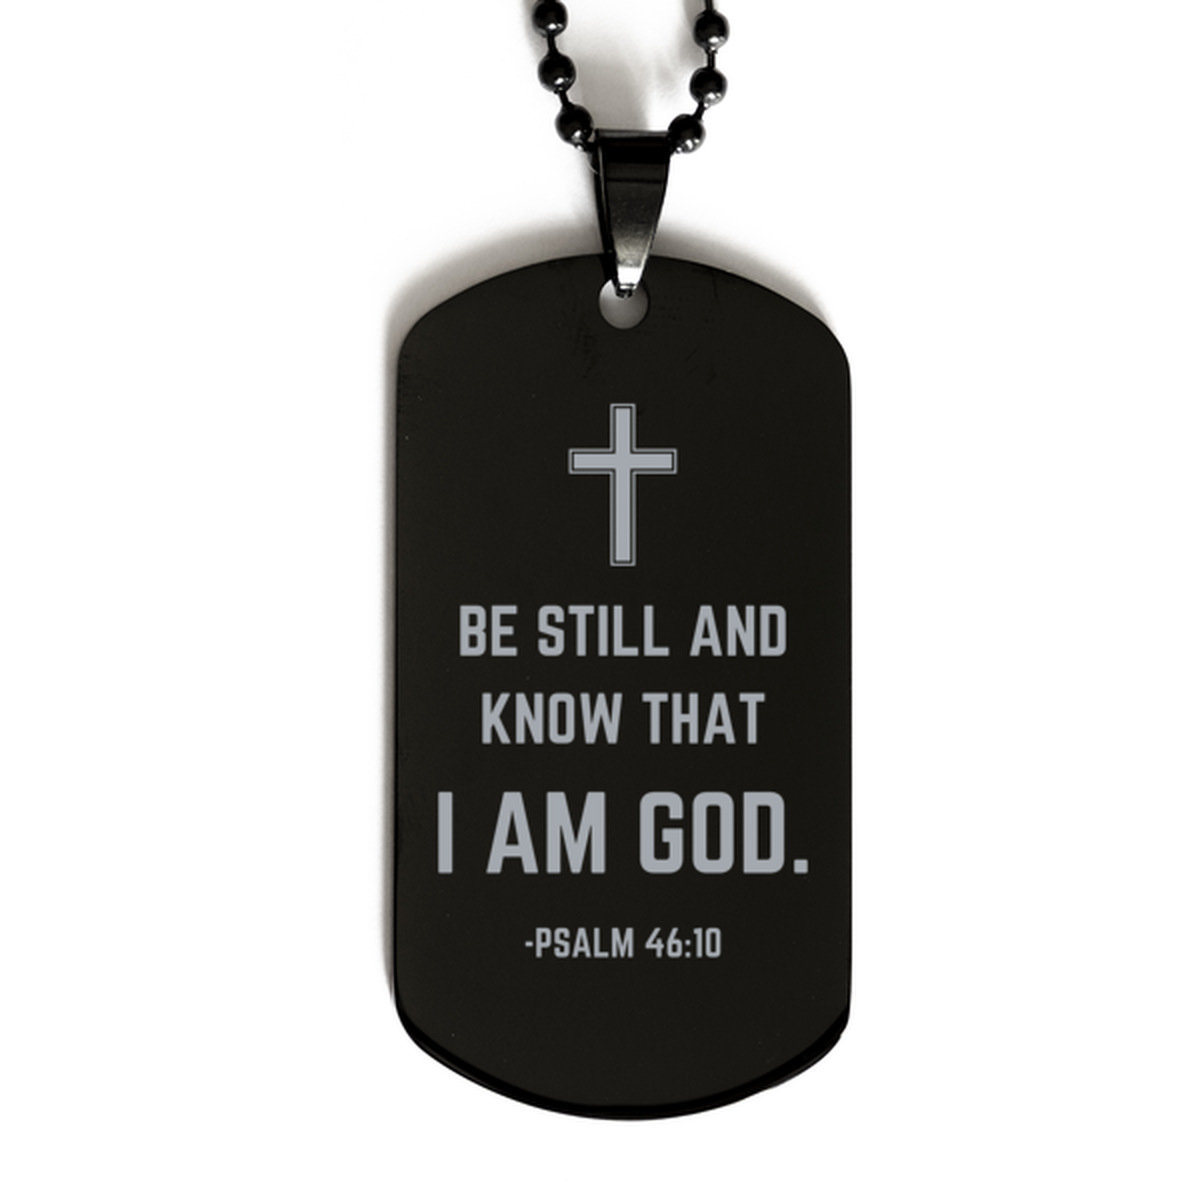 Baptism Gifts For Teenage Boys Girls, Christian Bible Verse Black Dog Tag, Be still and know that I am god, Confirmation Gifts, Bible Verse Necklace for Son, Godson, Grandson, Nephew